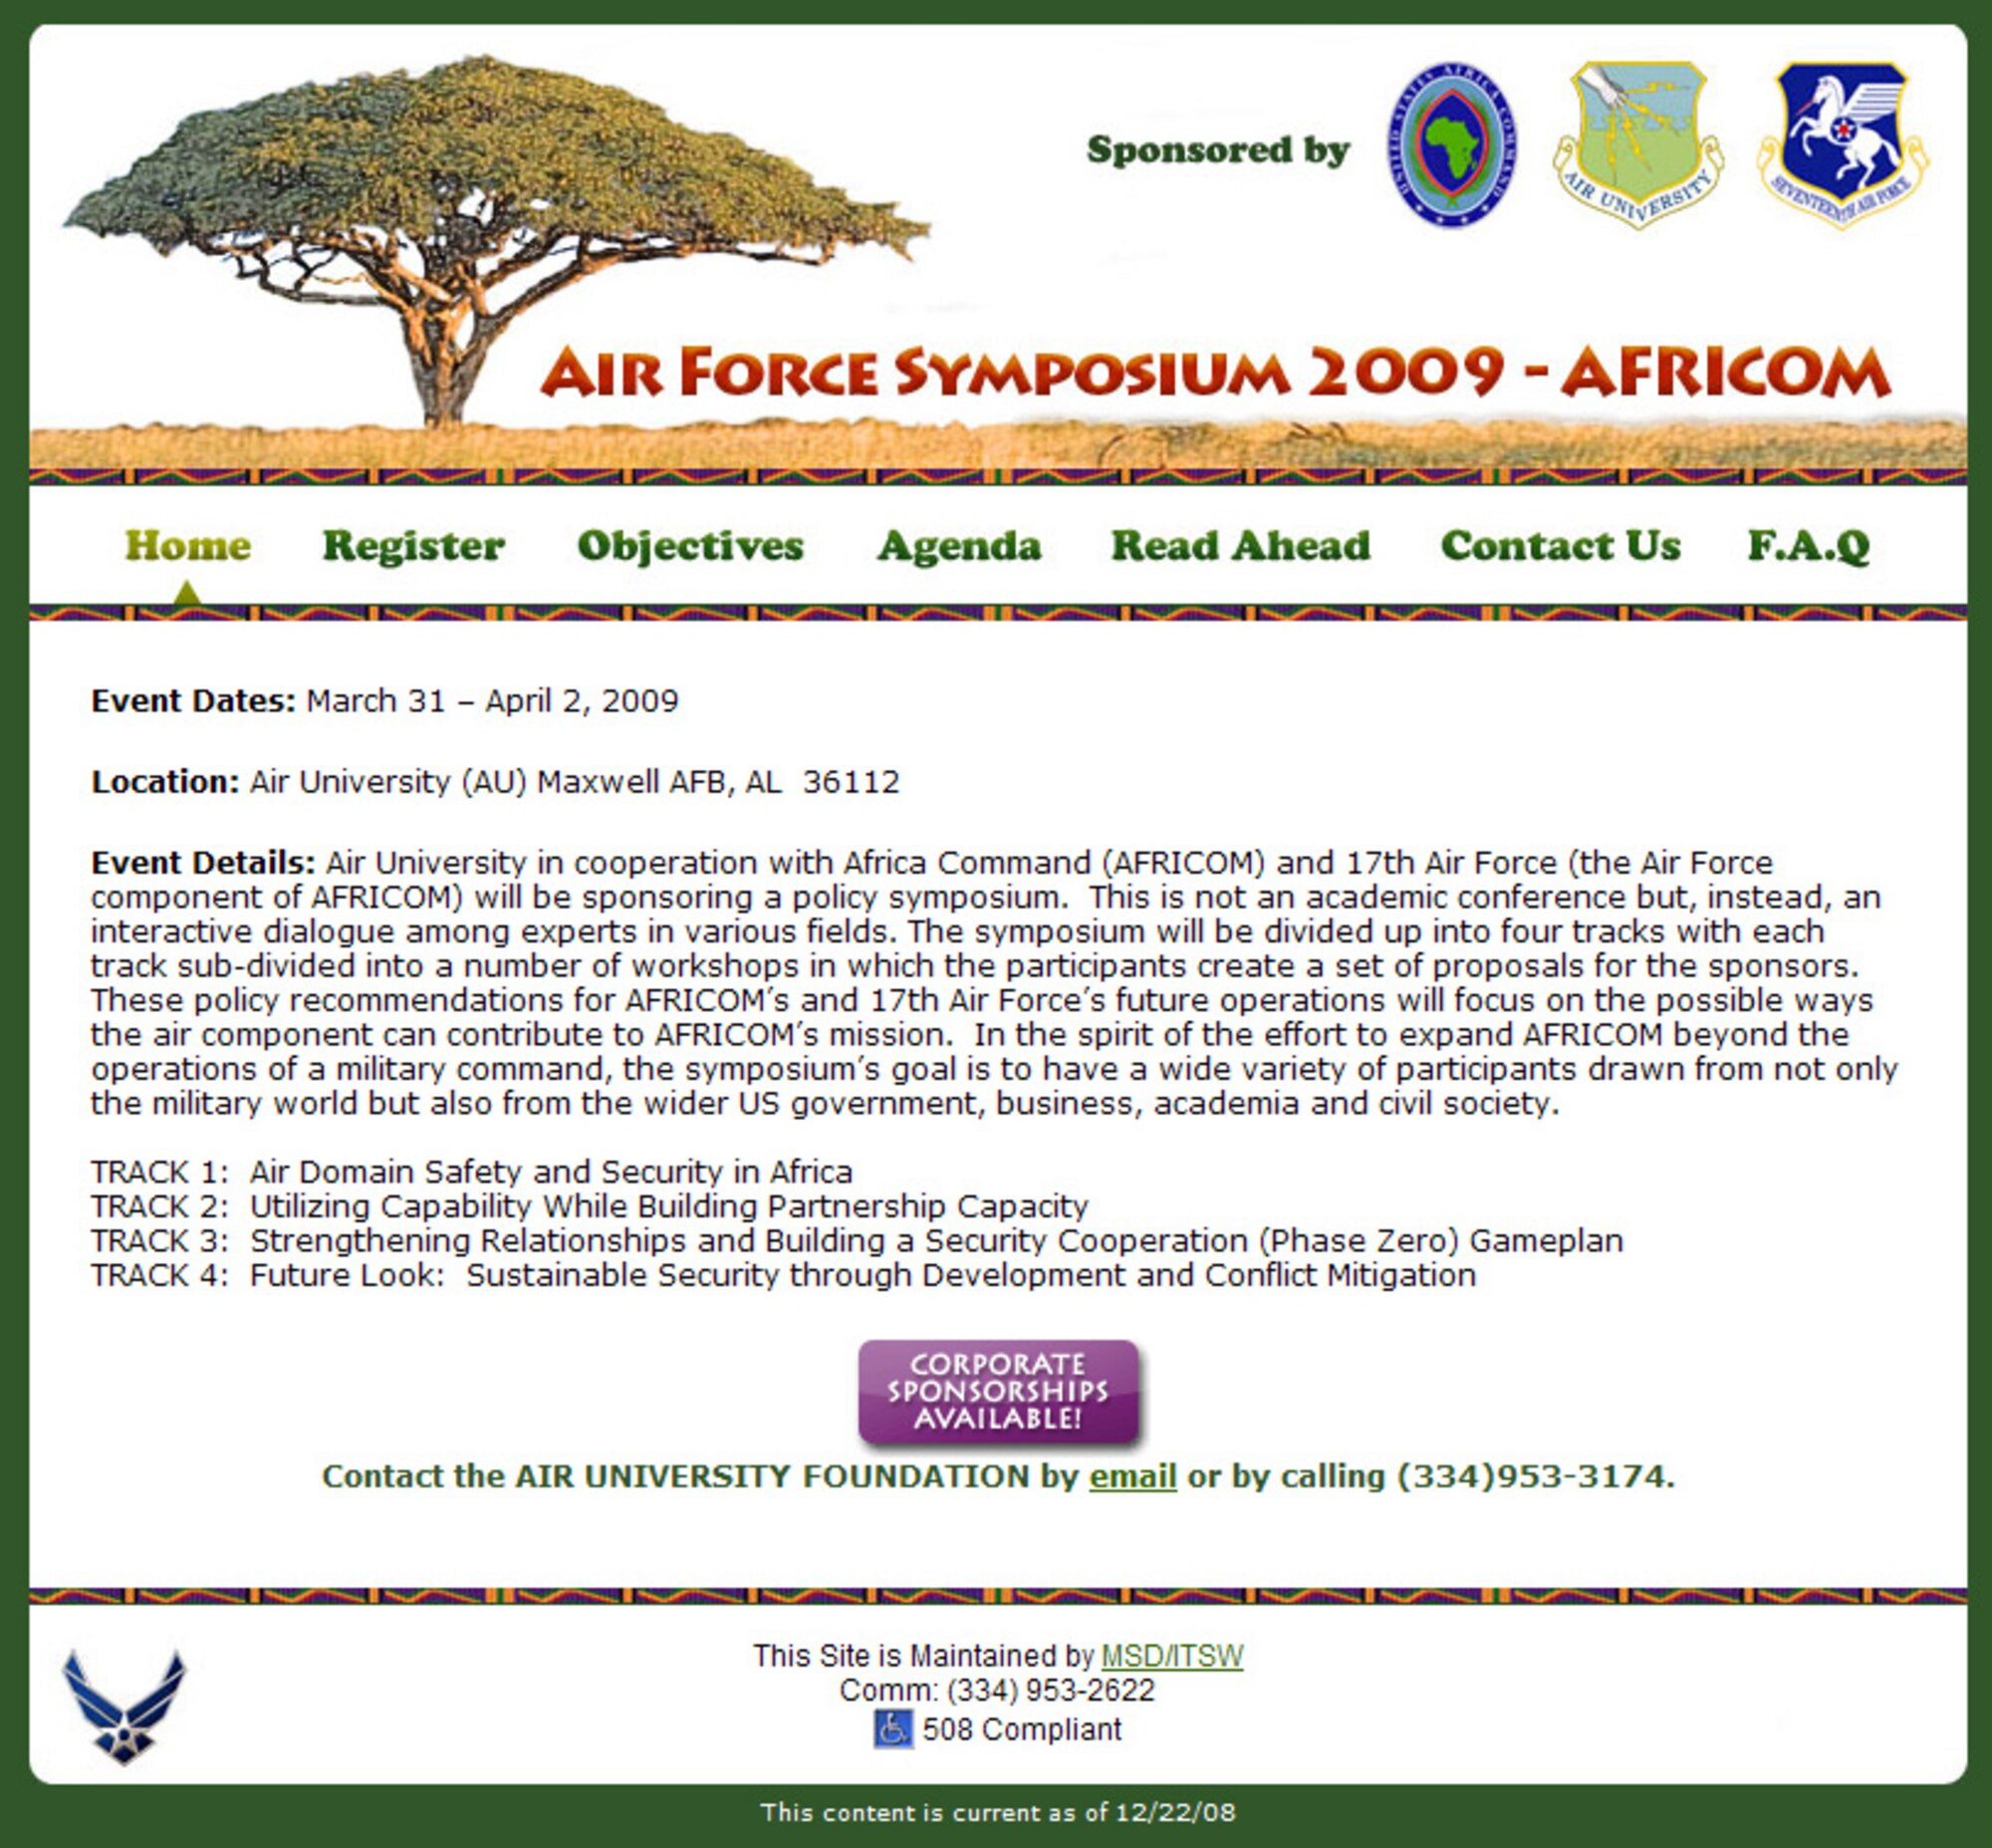 Registration has opened for the Air Force’s U.S. Africa Command Symposium scheduled to be held at Maxwell Air Force Base, Ala. from March 31 through April 2. Individuals wishing to find out more about the symposium can visit www.au.af.mil/awc/africom. (Courtesy graphic)